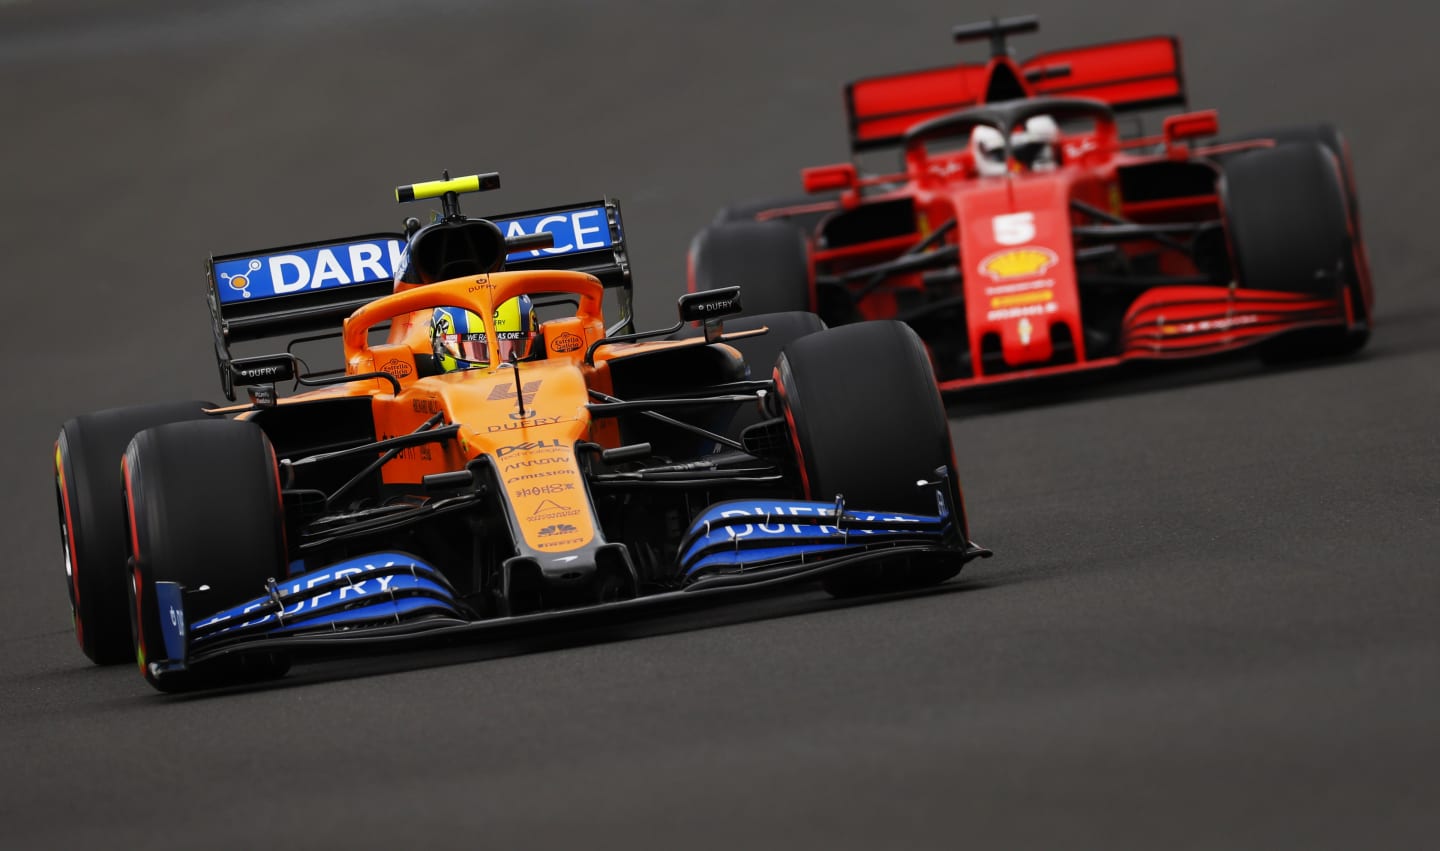 BUDAPEST, HUNGARY - JULY 18: Lando Norris of Great Britain driving the (4) McLaren F1 Team MCL35 Renault leads Sebastian Vettel of Germany driving the (5) Scuderia Ferrari SF1000 during qualifying for the F1 Grand Prix of Hungary at Hungaroring on July 18, 2020 in Budapest, Hungary. (Photo by Leonhard Foeger/Pool via Getty Images)